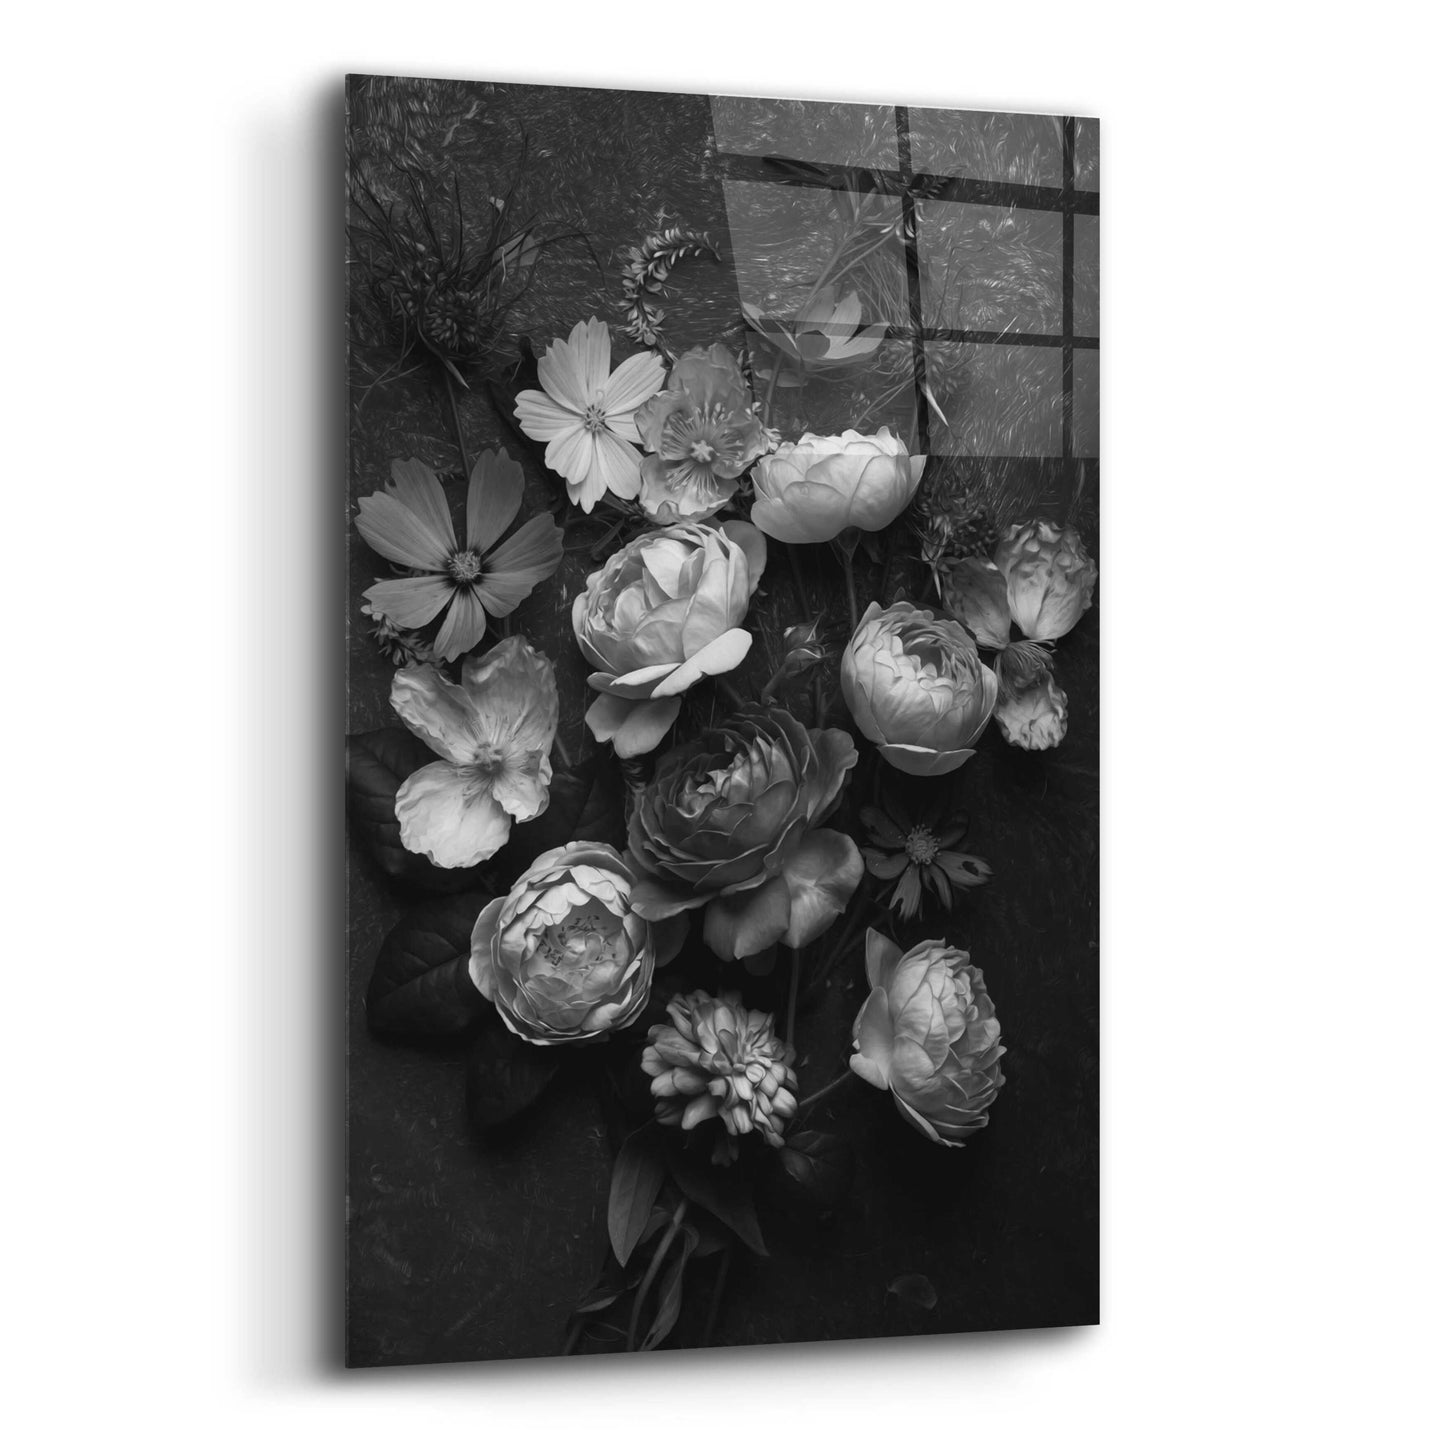 Epic Art 'A Monochrome Pocket Full of Posies' by Leah McLean, Acrylic Glass Wall Art,16x24